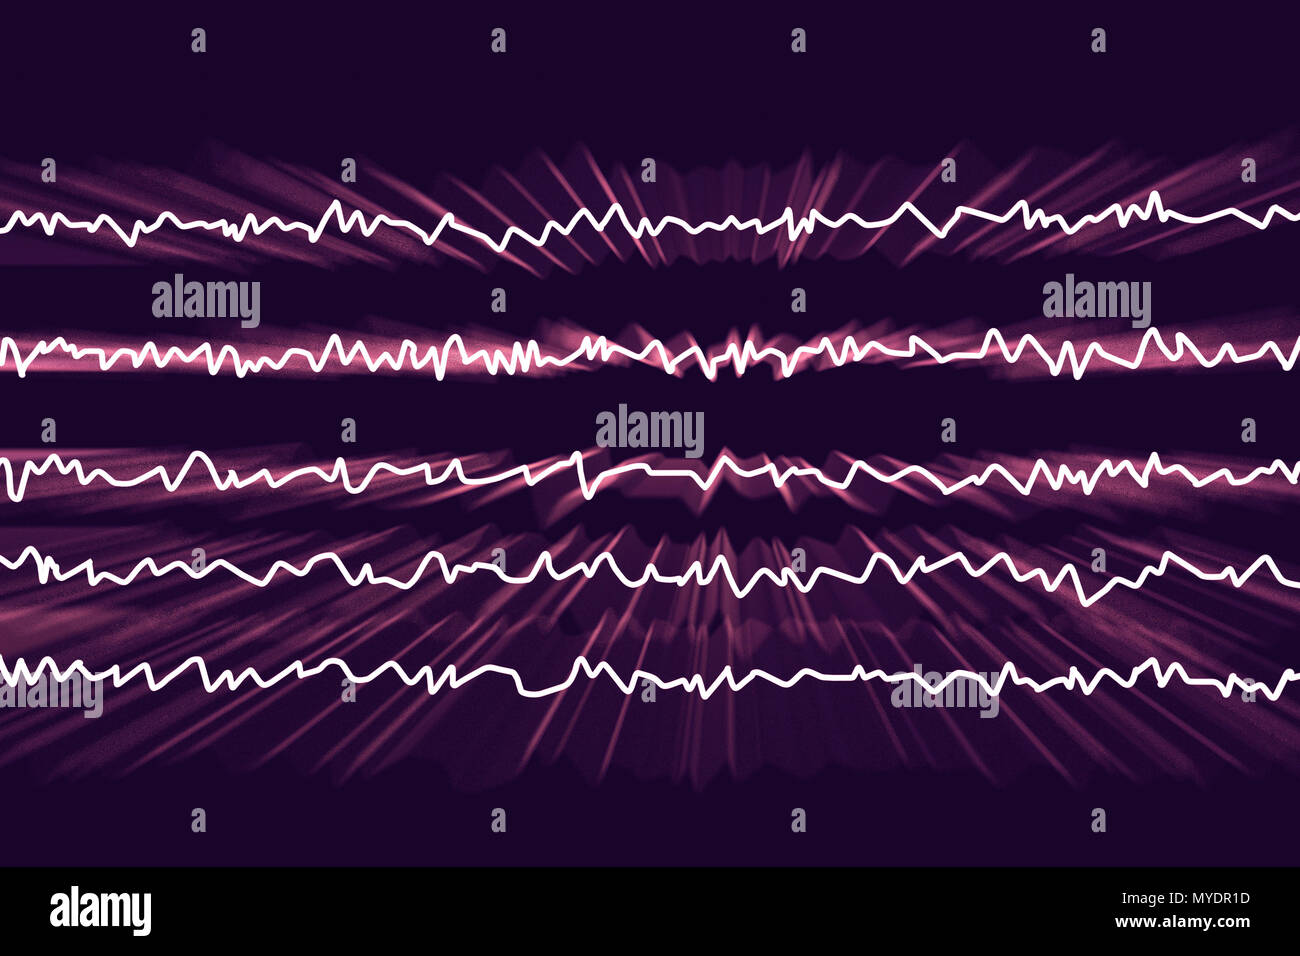 Brain waves in awake state with mental activity, computer illustration. An electroencephalogram (EEG) measures electrical activity in the brain using electrodes attached to the scalp. Various disorders can be diagnosed by analysing EEG results. Stock Photo